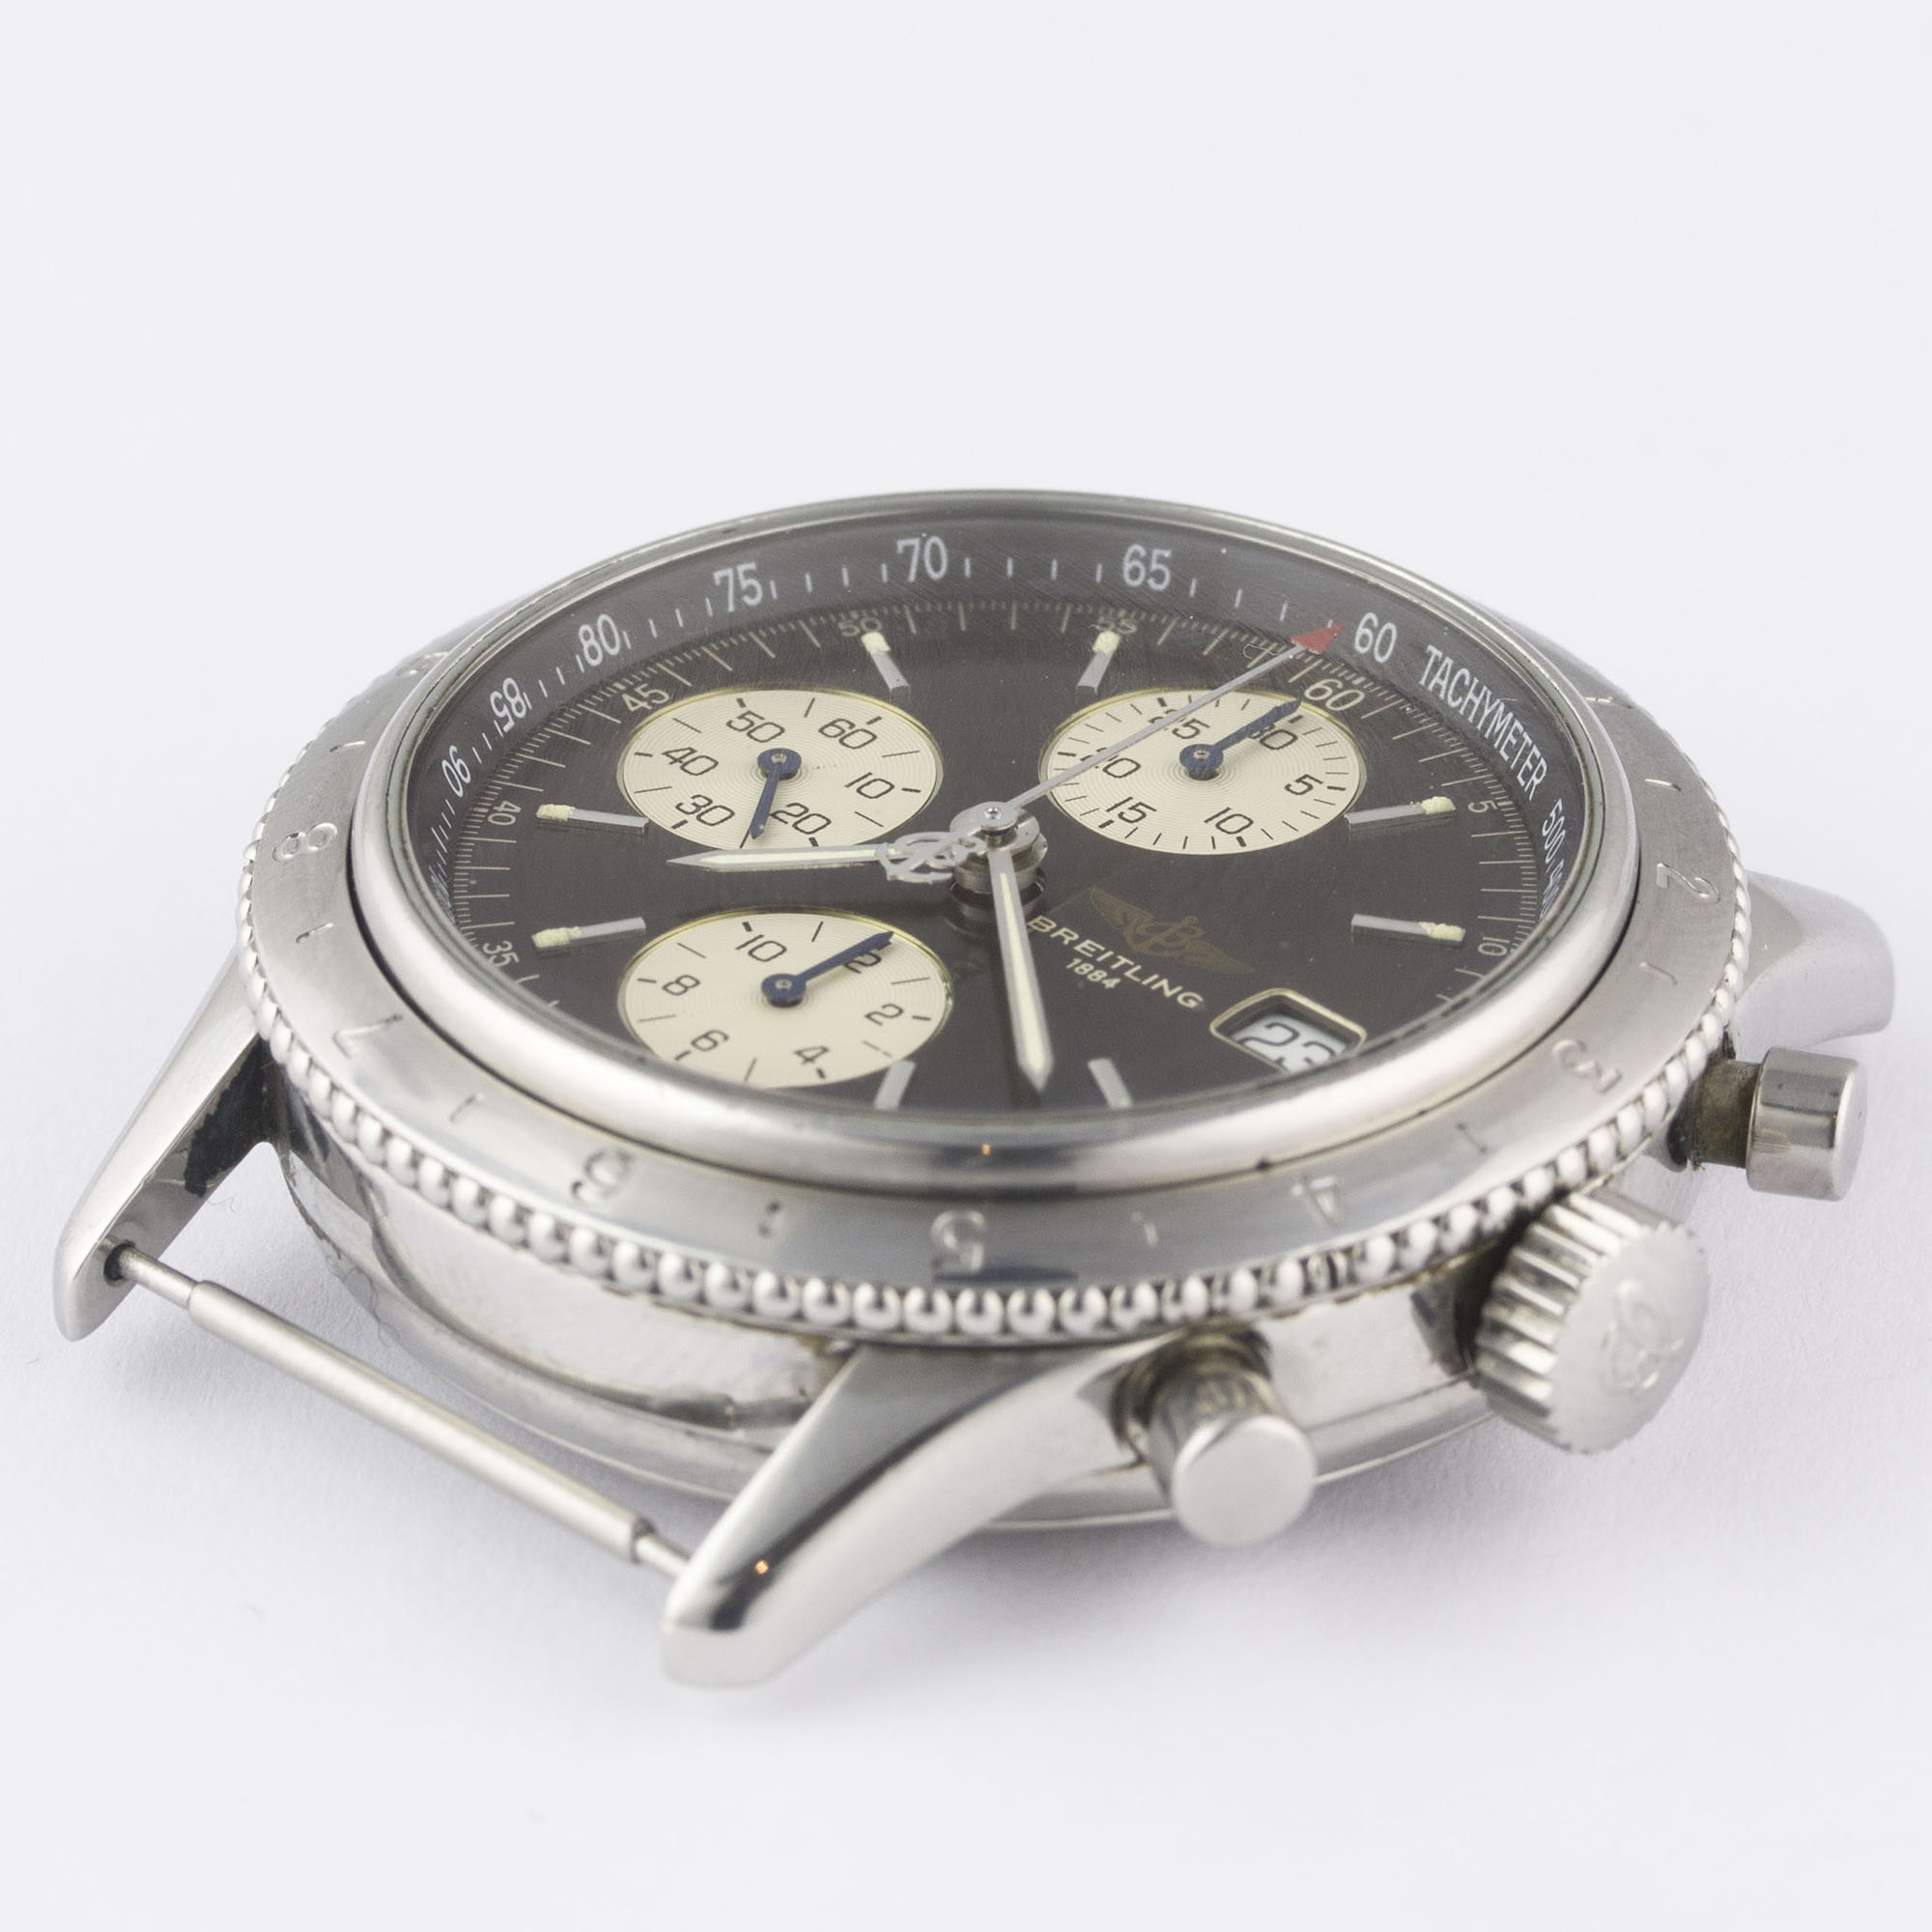 A RARE GENTLEMAN'S STAINLESS STEEL BREITLING NAVITIMER AVI AUTOMATIC CHRONOGRAPH WRIST WATCH CIRCA - Image 3 of 8